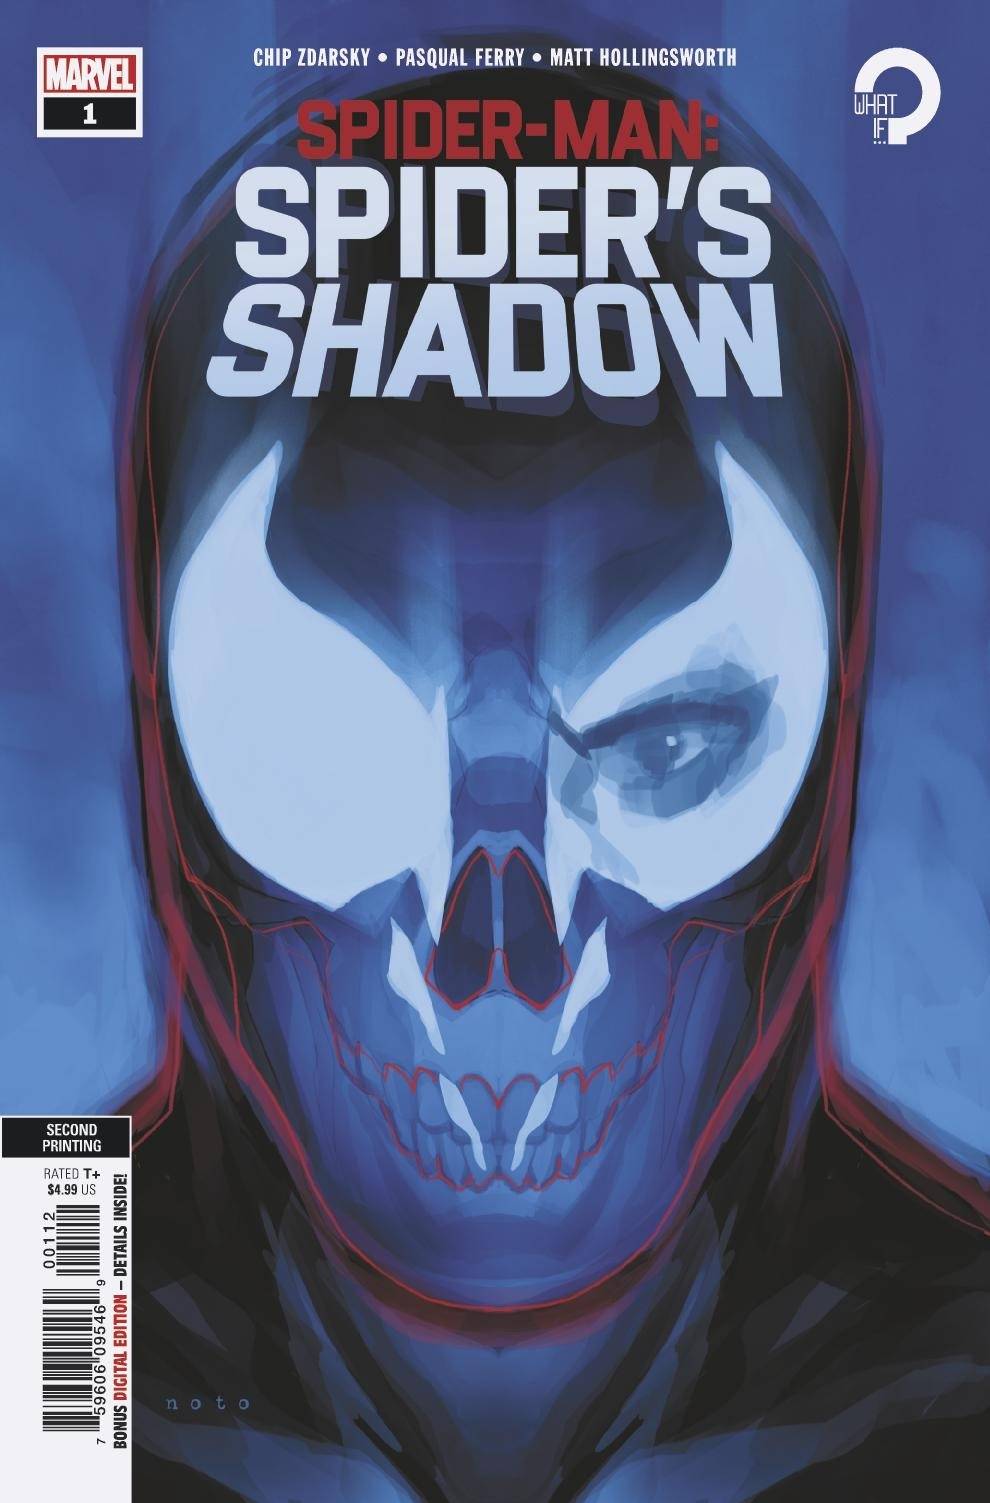 05/26/2021 SPIDER-MAN SPIDERS SHADOW #1 (OF 5) 2ND PTG VAR